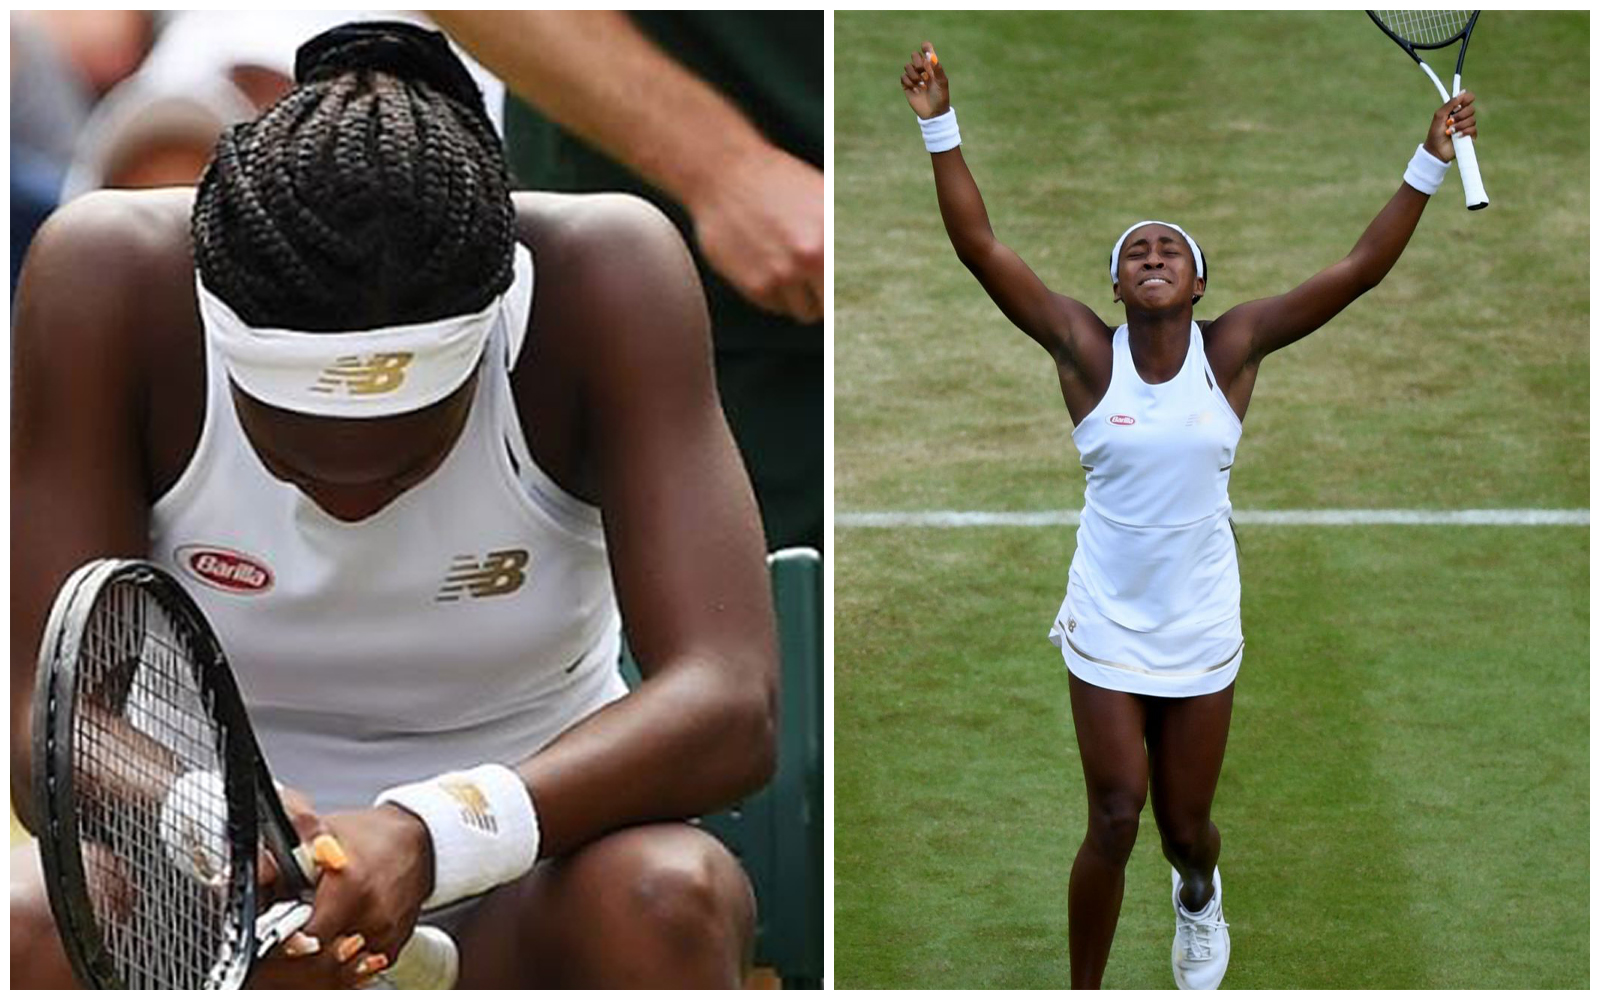 Coco Gauff, The 15-Year-Old Tennis Prodigy, Prays Before Every Match1600 x 1000